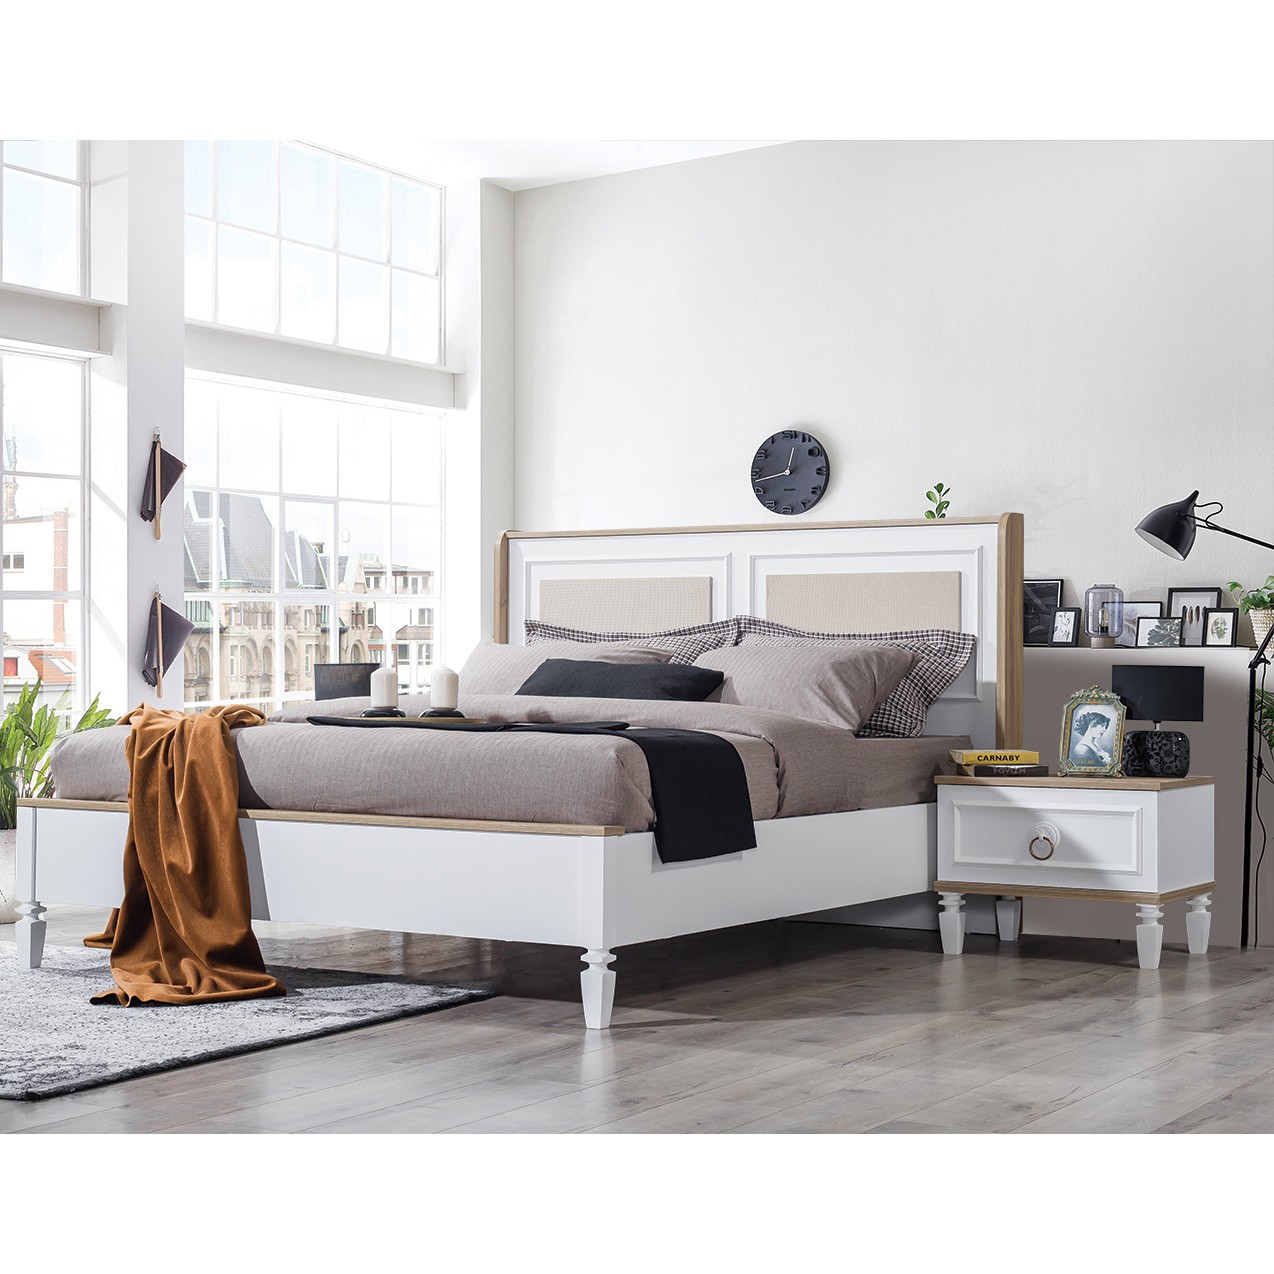 Mila Vol4 Bedroom (Bed Without Storage 160x200cm)